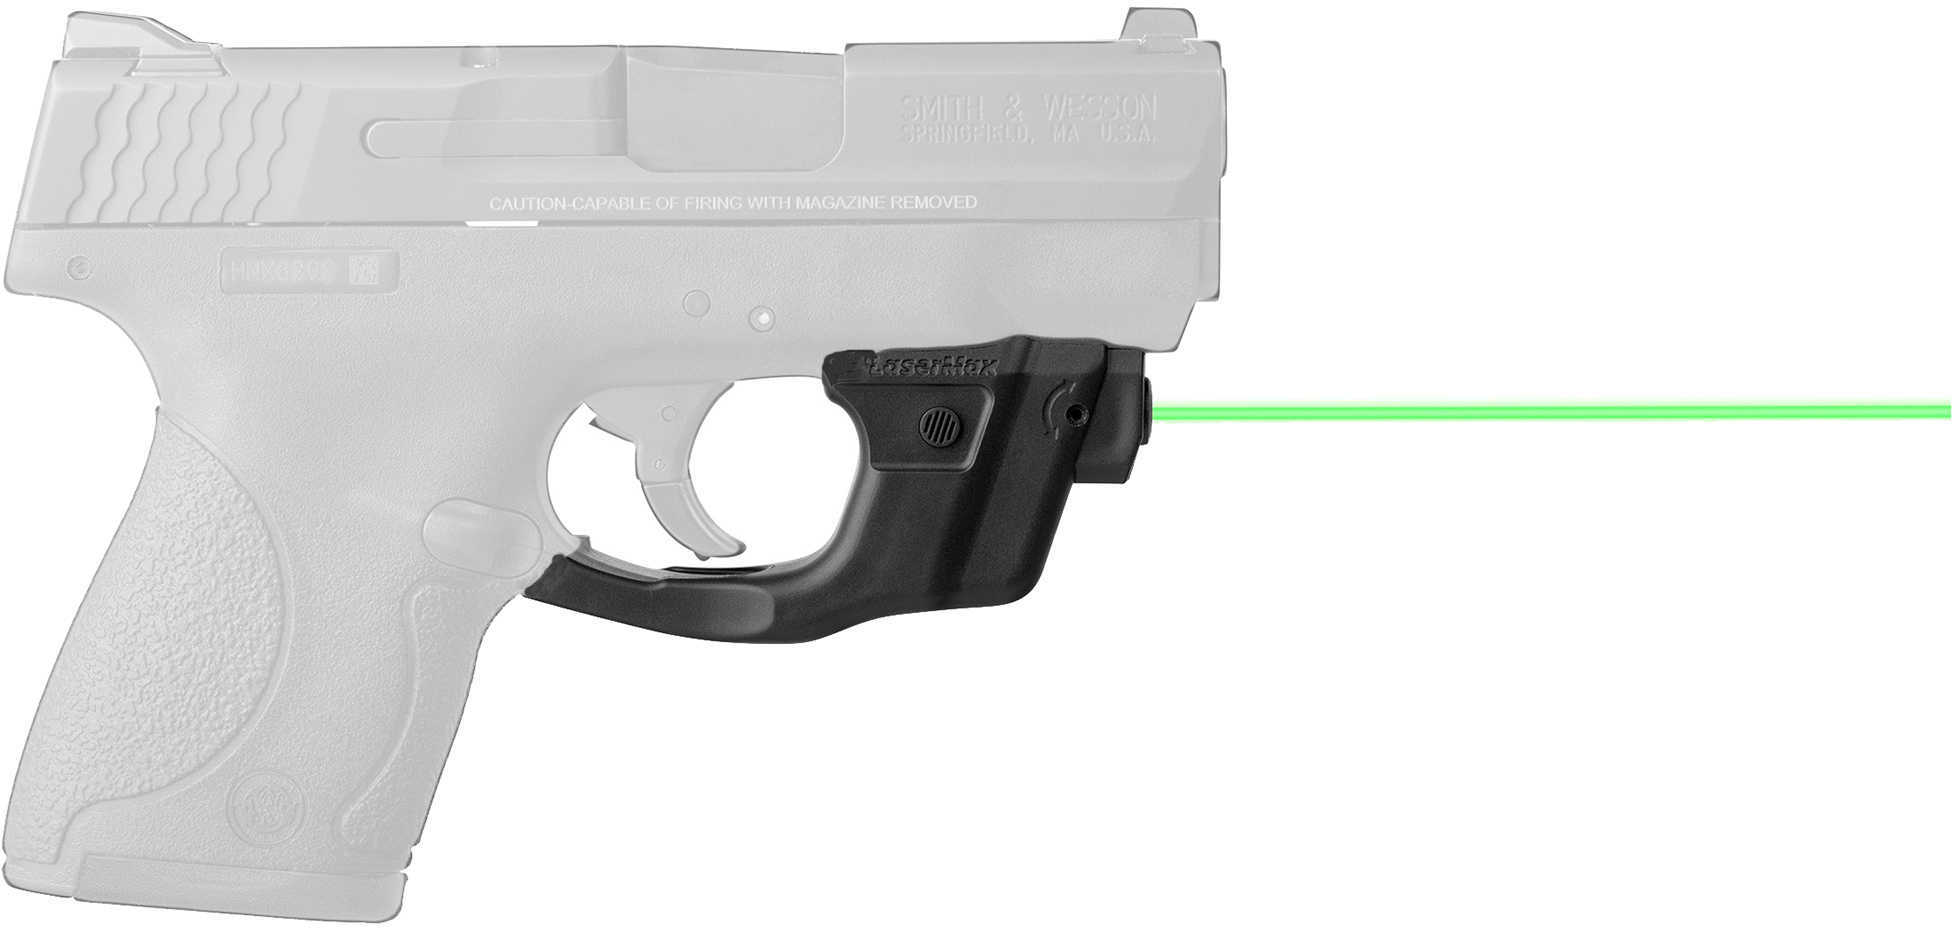 LaserMax CenterFire Sight with Grip Sense Smith & Wesson Shield M2.0 9mm / .40 S&W Green Black